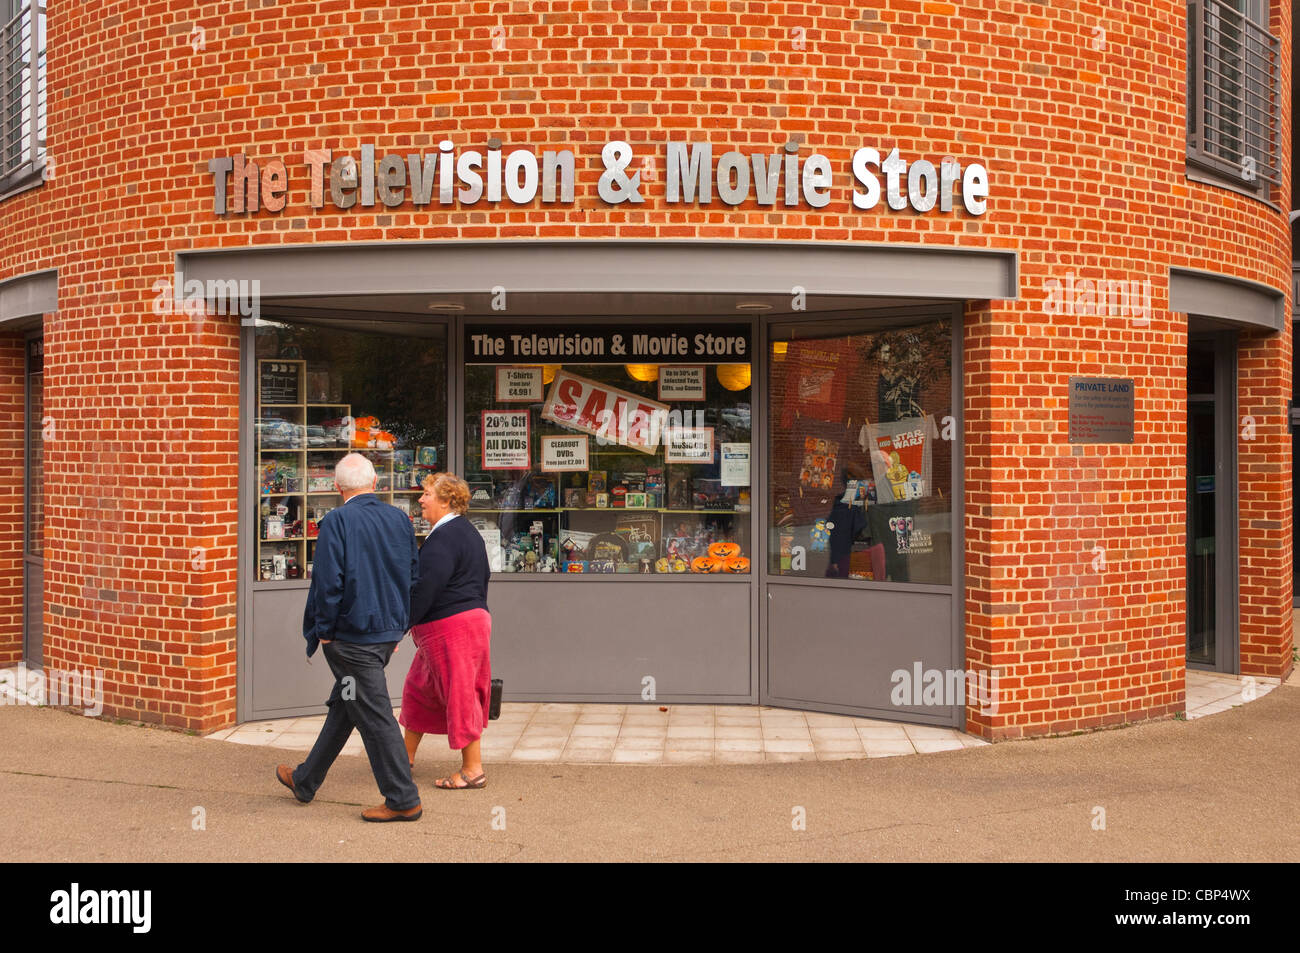 The television & movie bbc shop store selling tv and film merchandise in the city centre of Norfolk, Uk Stock Photo - Alamy